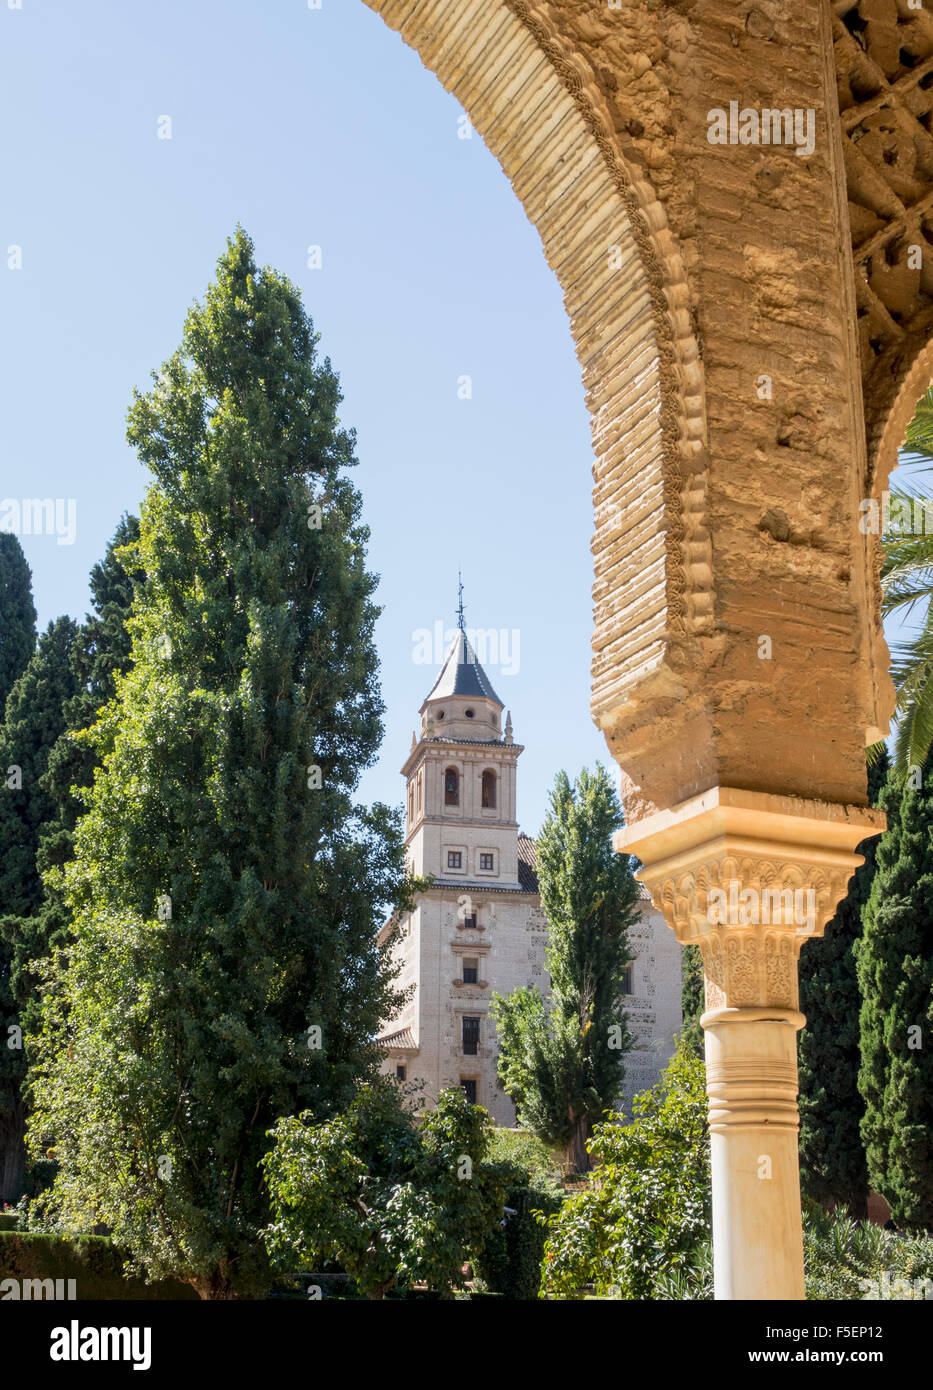 Gardens and Palacios Nazaries in Alhambra palace in ancient city of Granada in Andalucia, Spain, Europe Stock Photo